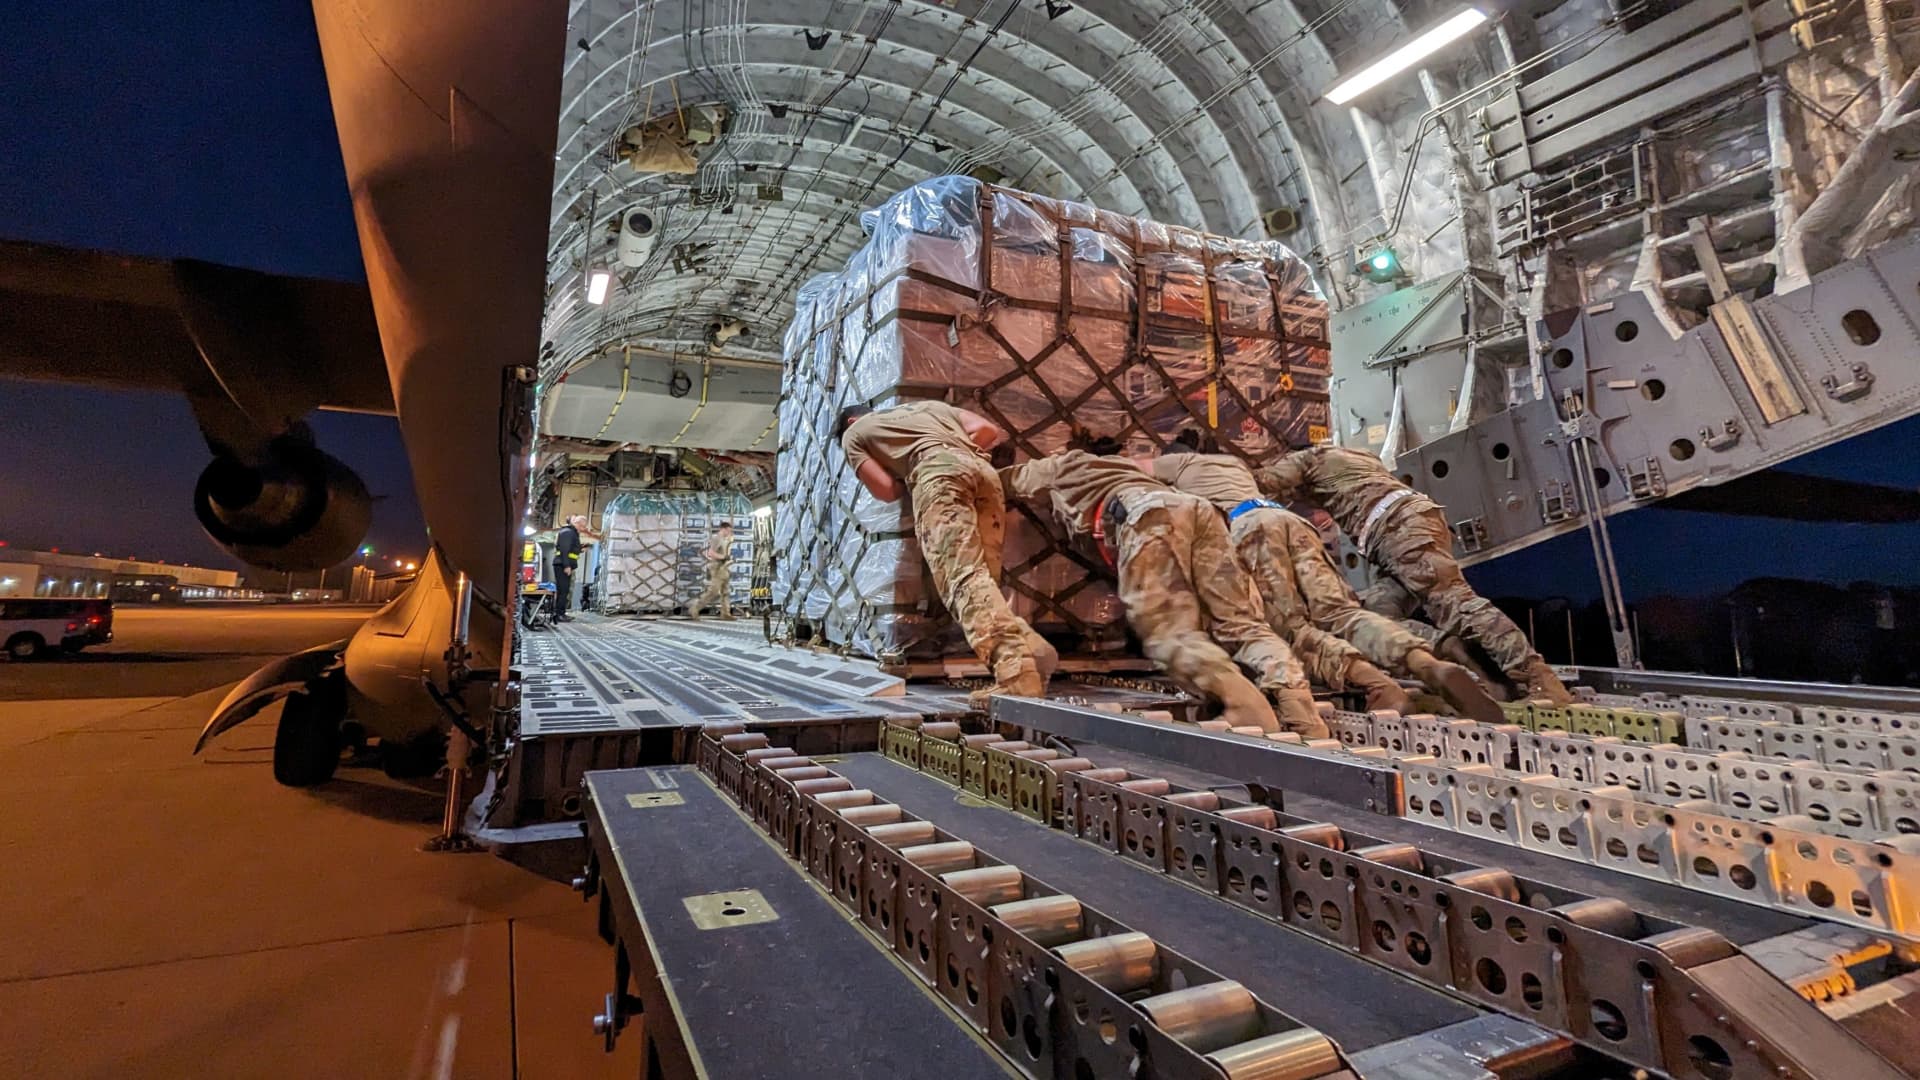 Equipment and supplies for the Urban Search and Rescue team from Fairfax, Virginia, and USAID to help in support operations for victims of the earthquake in Turkey are loaded onto a transport plane at Dover Air Force Base, Delaware, U.S., in this handout photo released on February 7, 2023. 